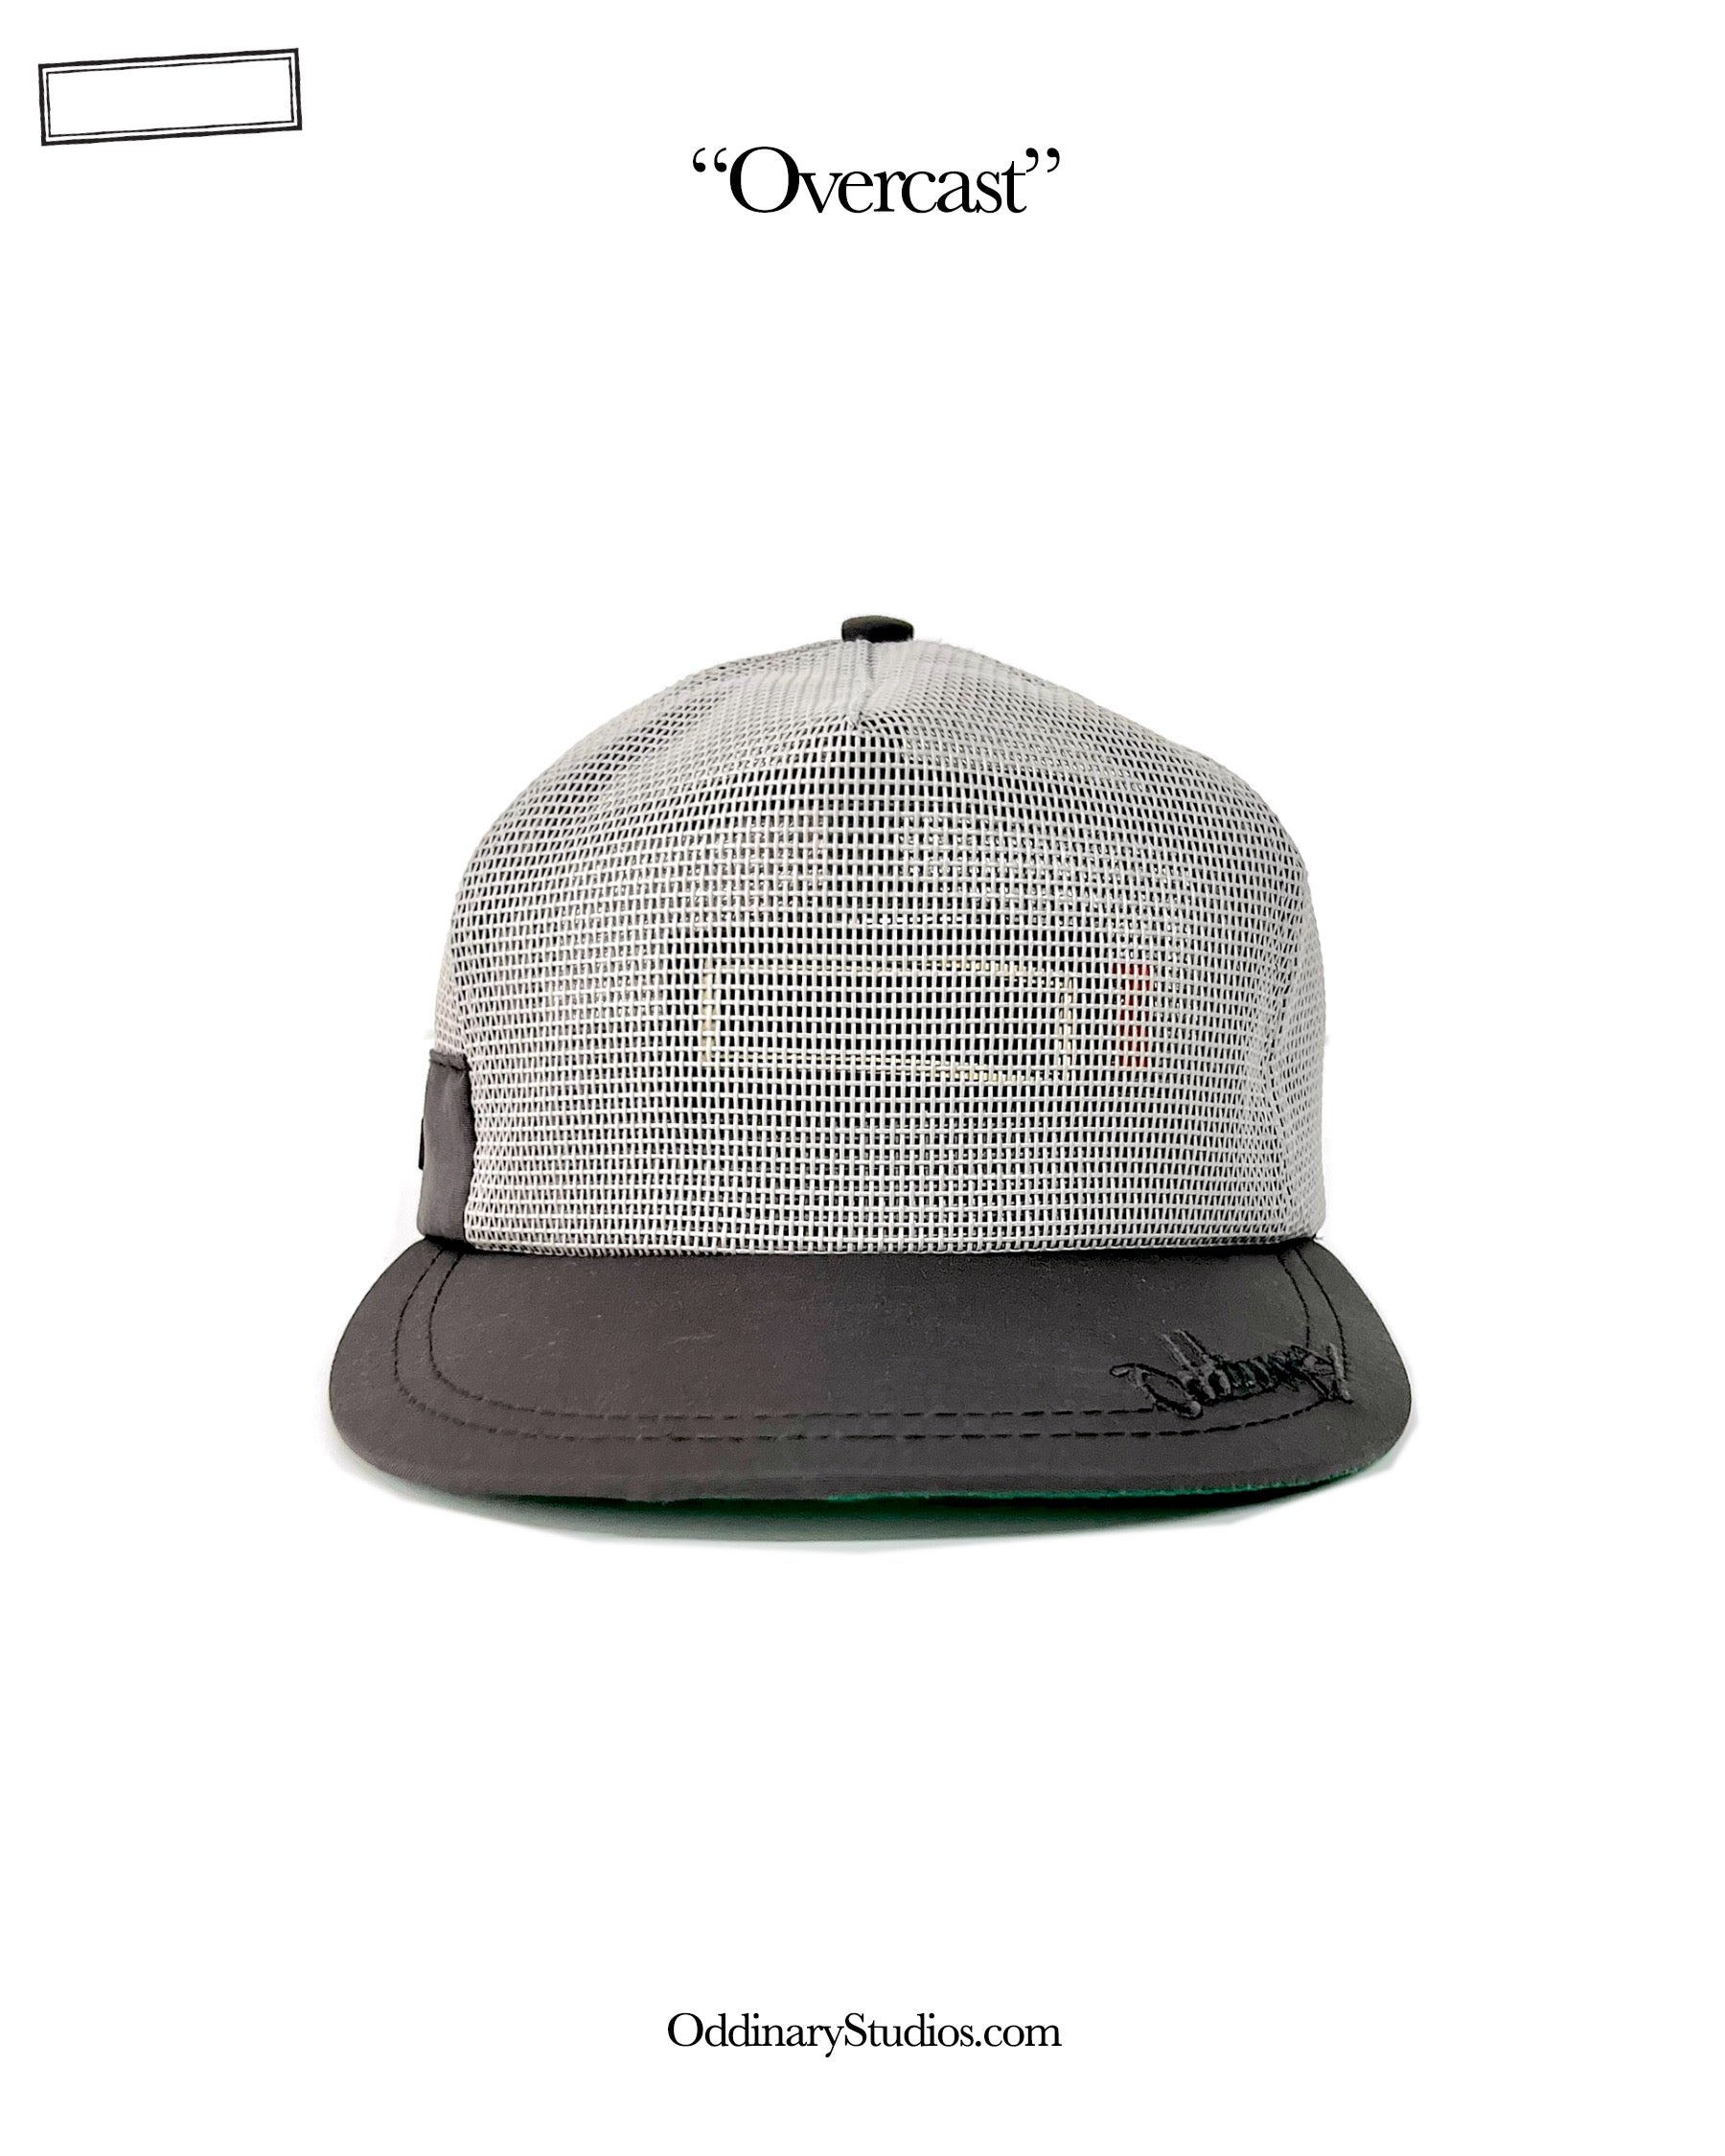 Sub Surf Mesh Trucker's Cap for Costume or Every Day screen Print